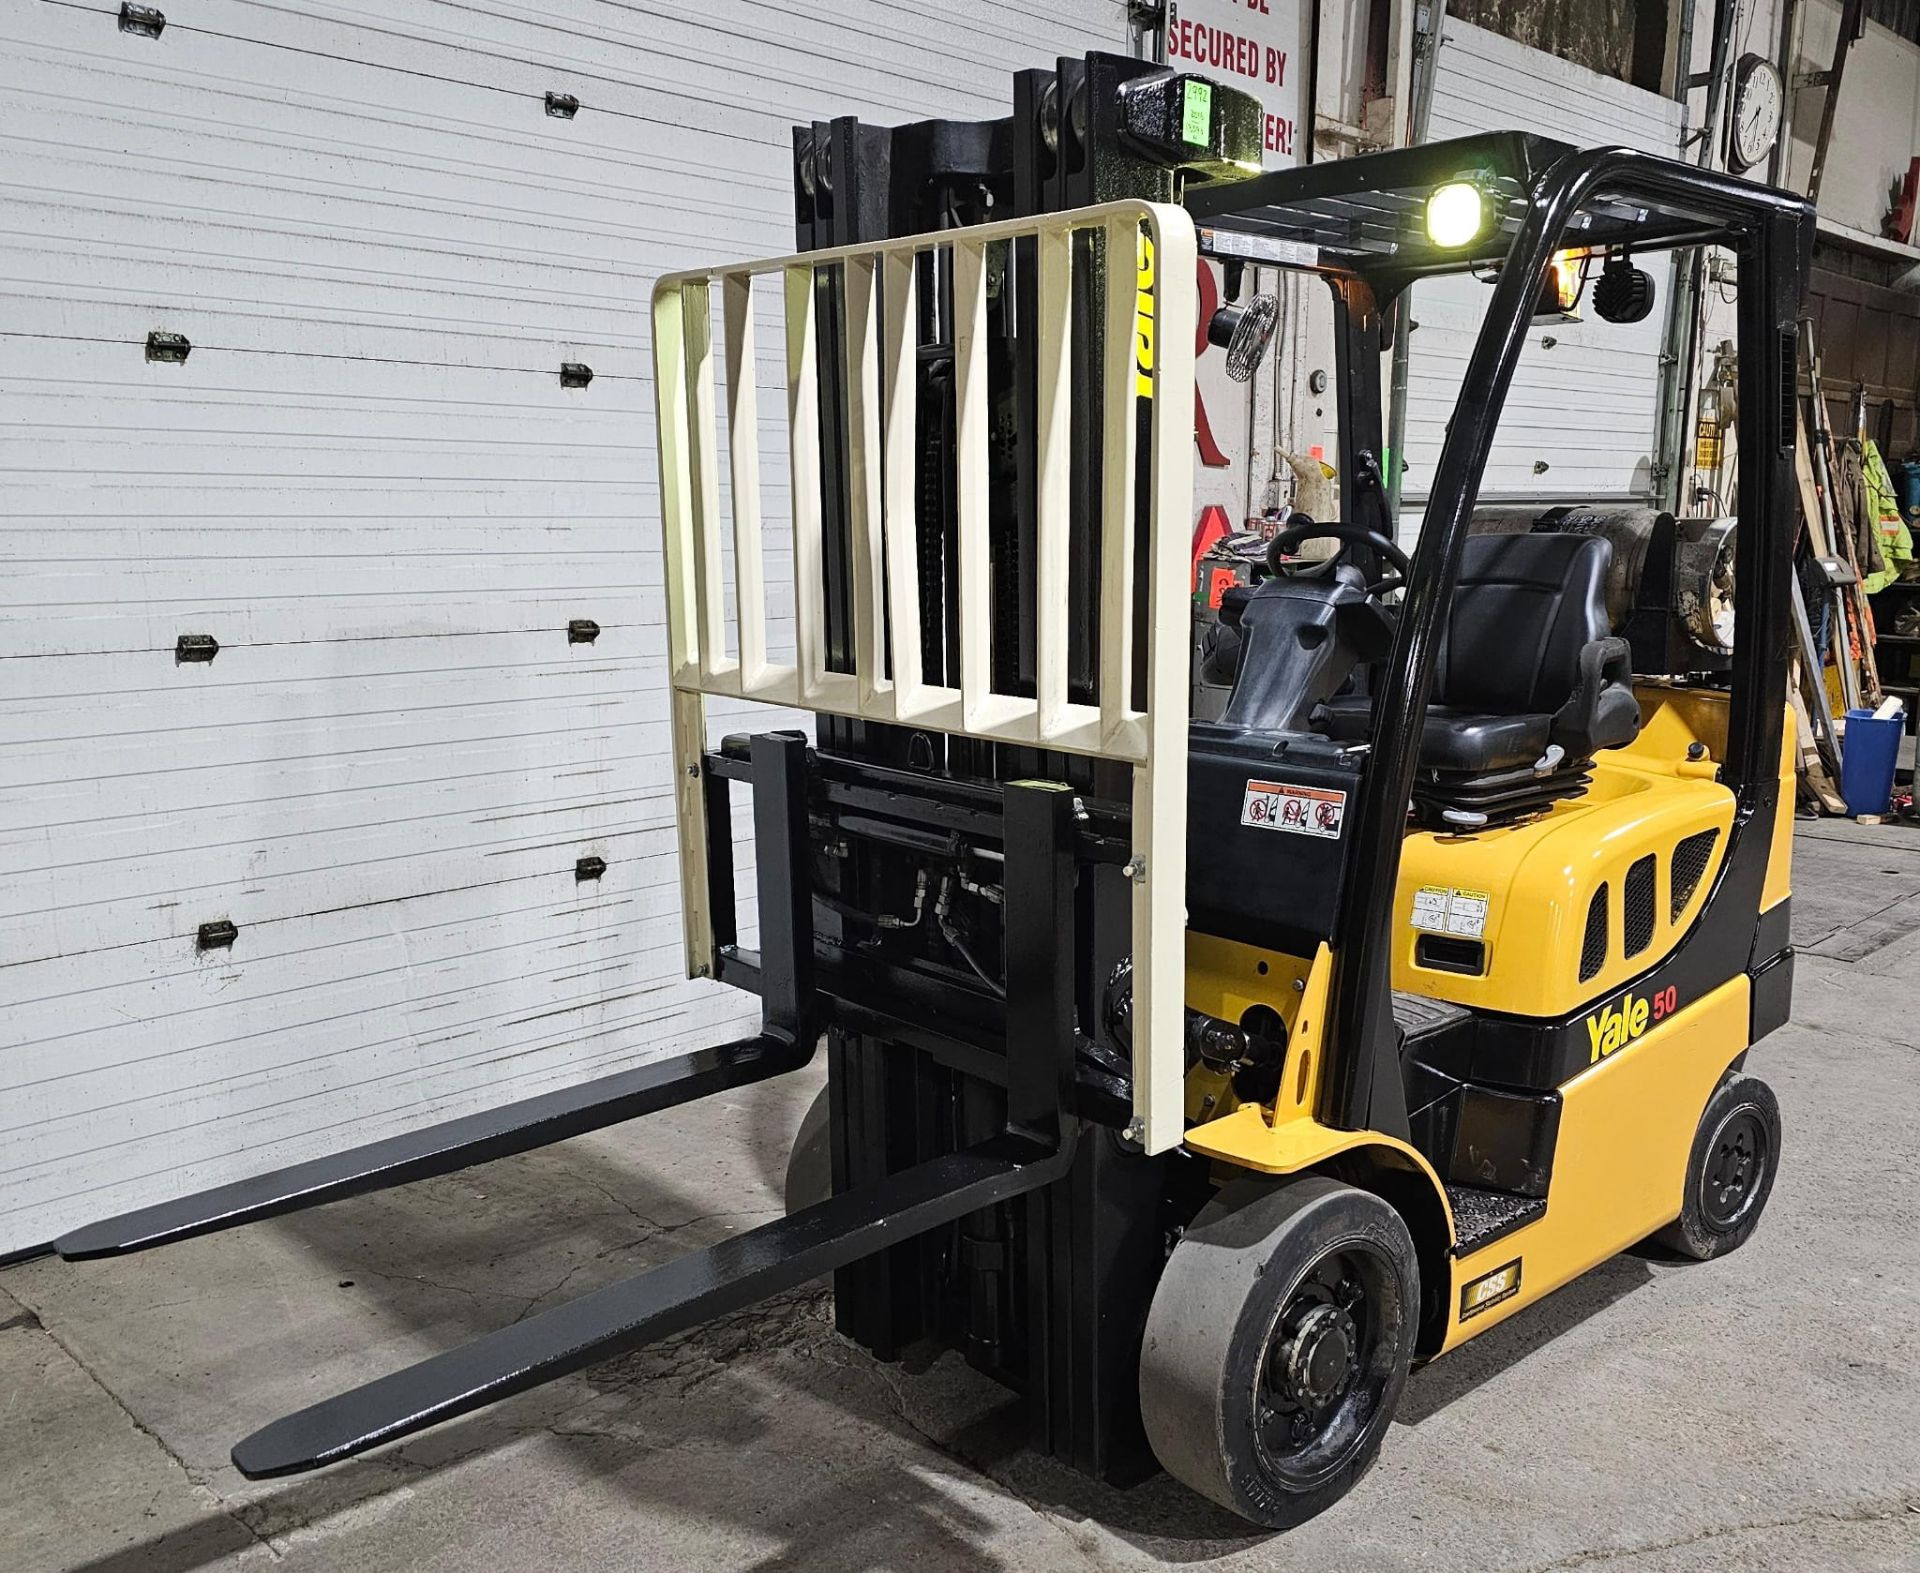 2016 Yale 5,000lbs Capacity LPG (Propane) Forklift 3-STAGE MAST with 4 functions 194.9" load - Image 4 of 6